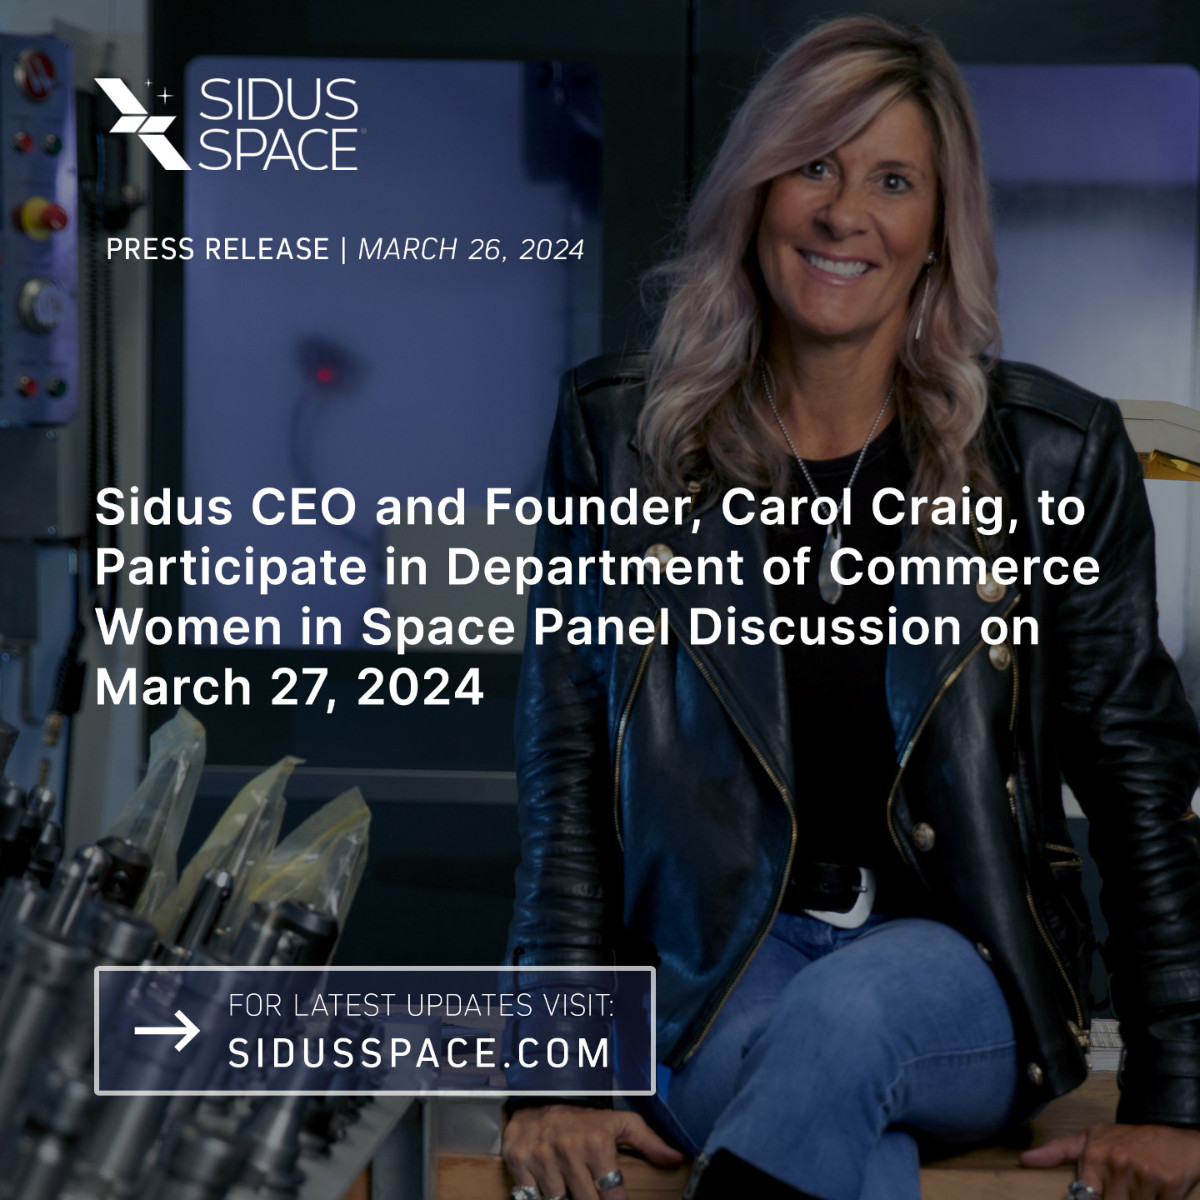 🛰️ Sidus CEO and Founder, Carol Craig, to Participate in Department of Commerce Women in Space Panel Discussion on March 27, 2024

Details 🔗: brnw.ch/Panel

#SidusNews #SidusSpace #WomenInSpace #LizzieSat #Entrepreneurs #CommercialSpace